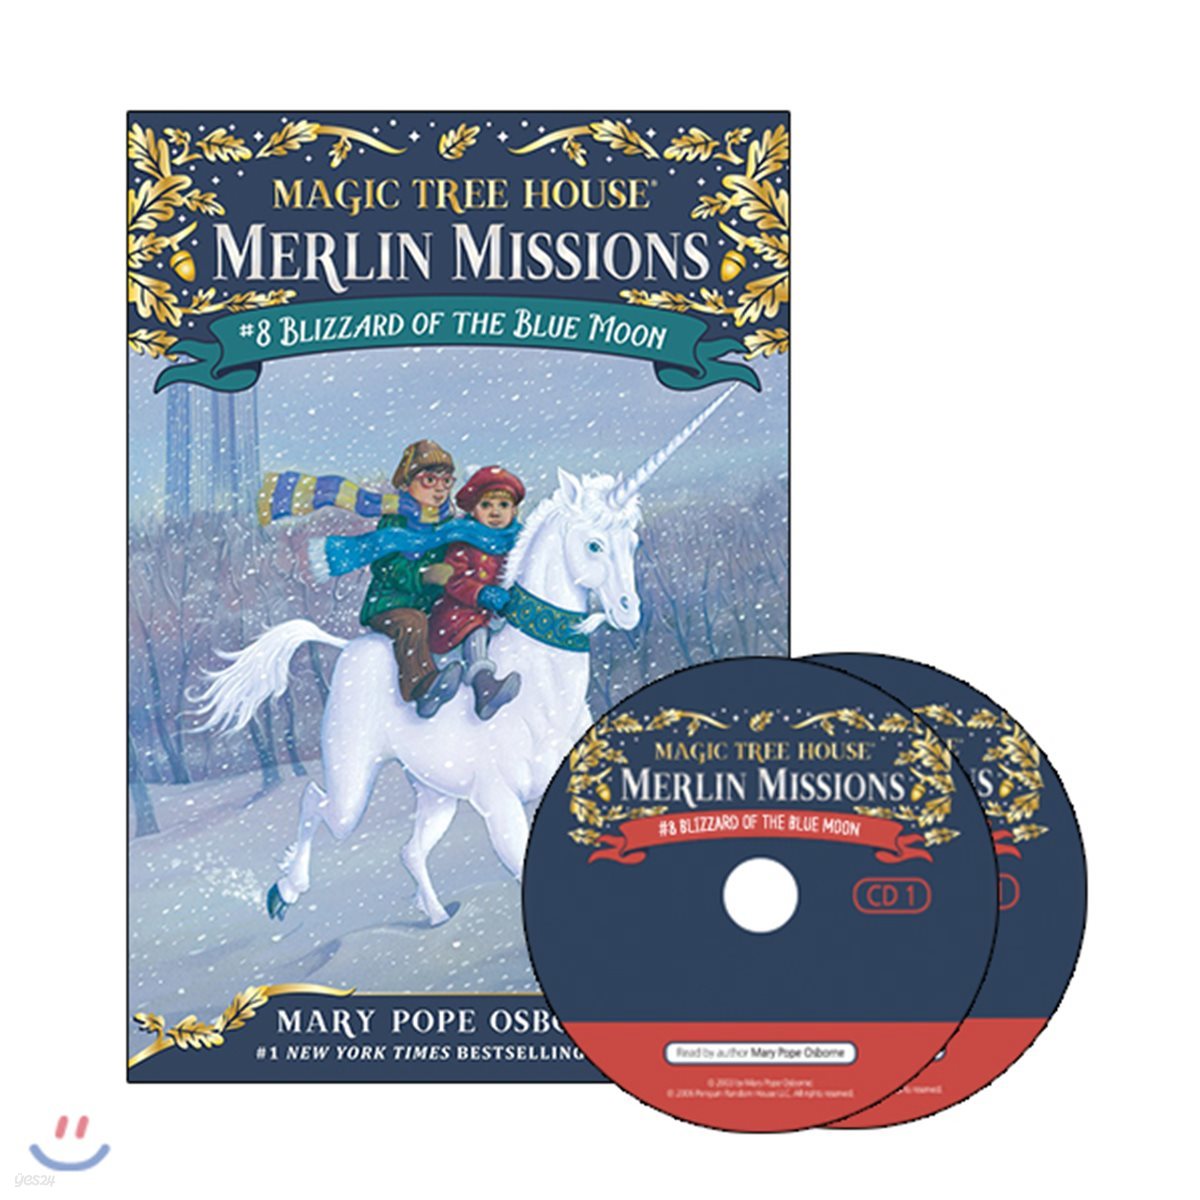 Merlin Mission #8 : Blizzard of the Blue Moon (Book + CD)